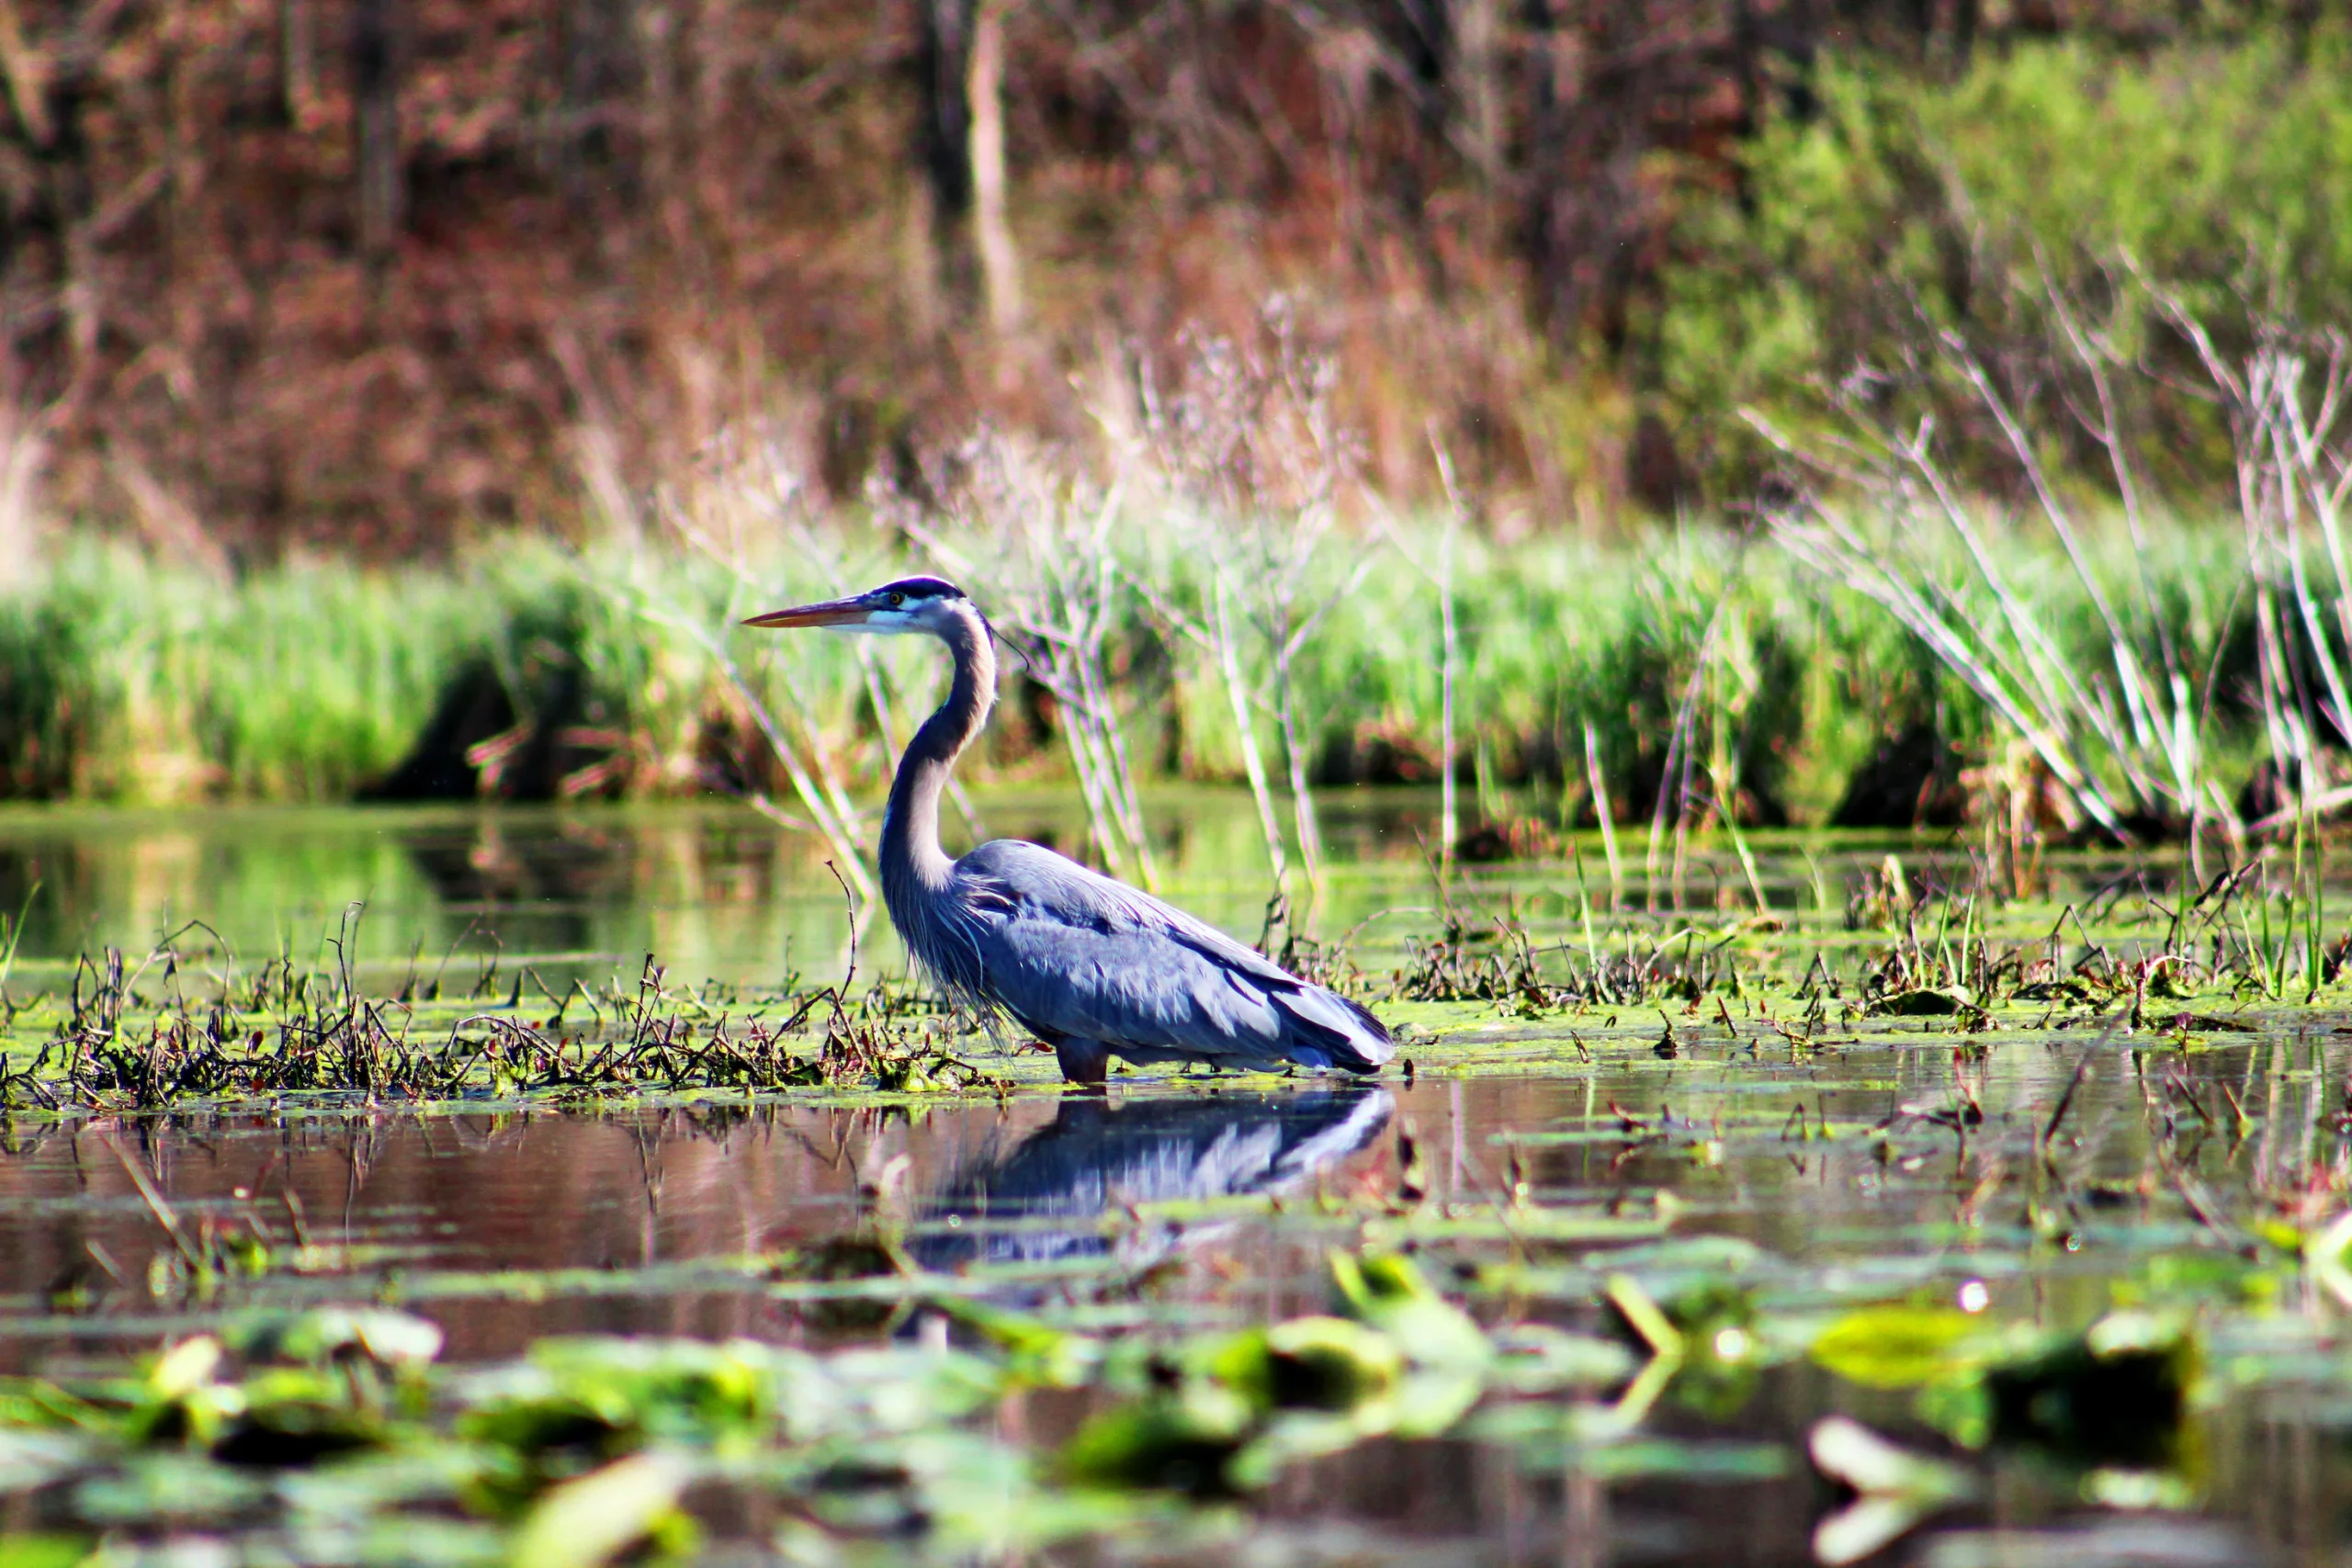 A great blue heron standing in body of water and tall grasses